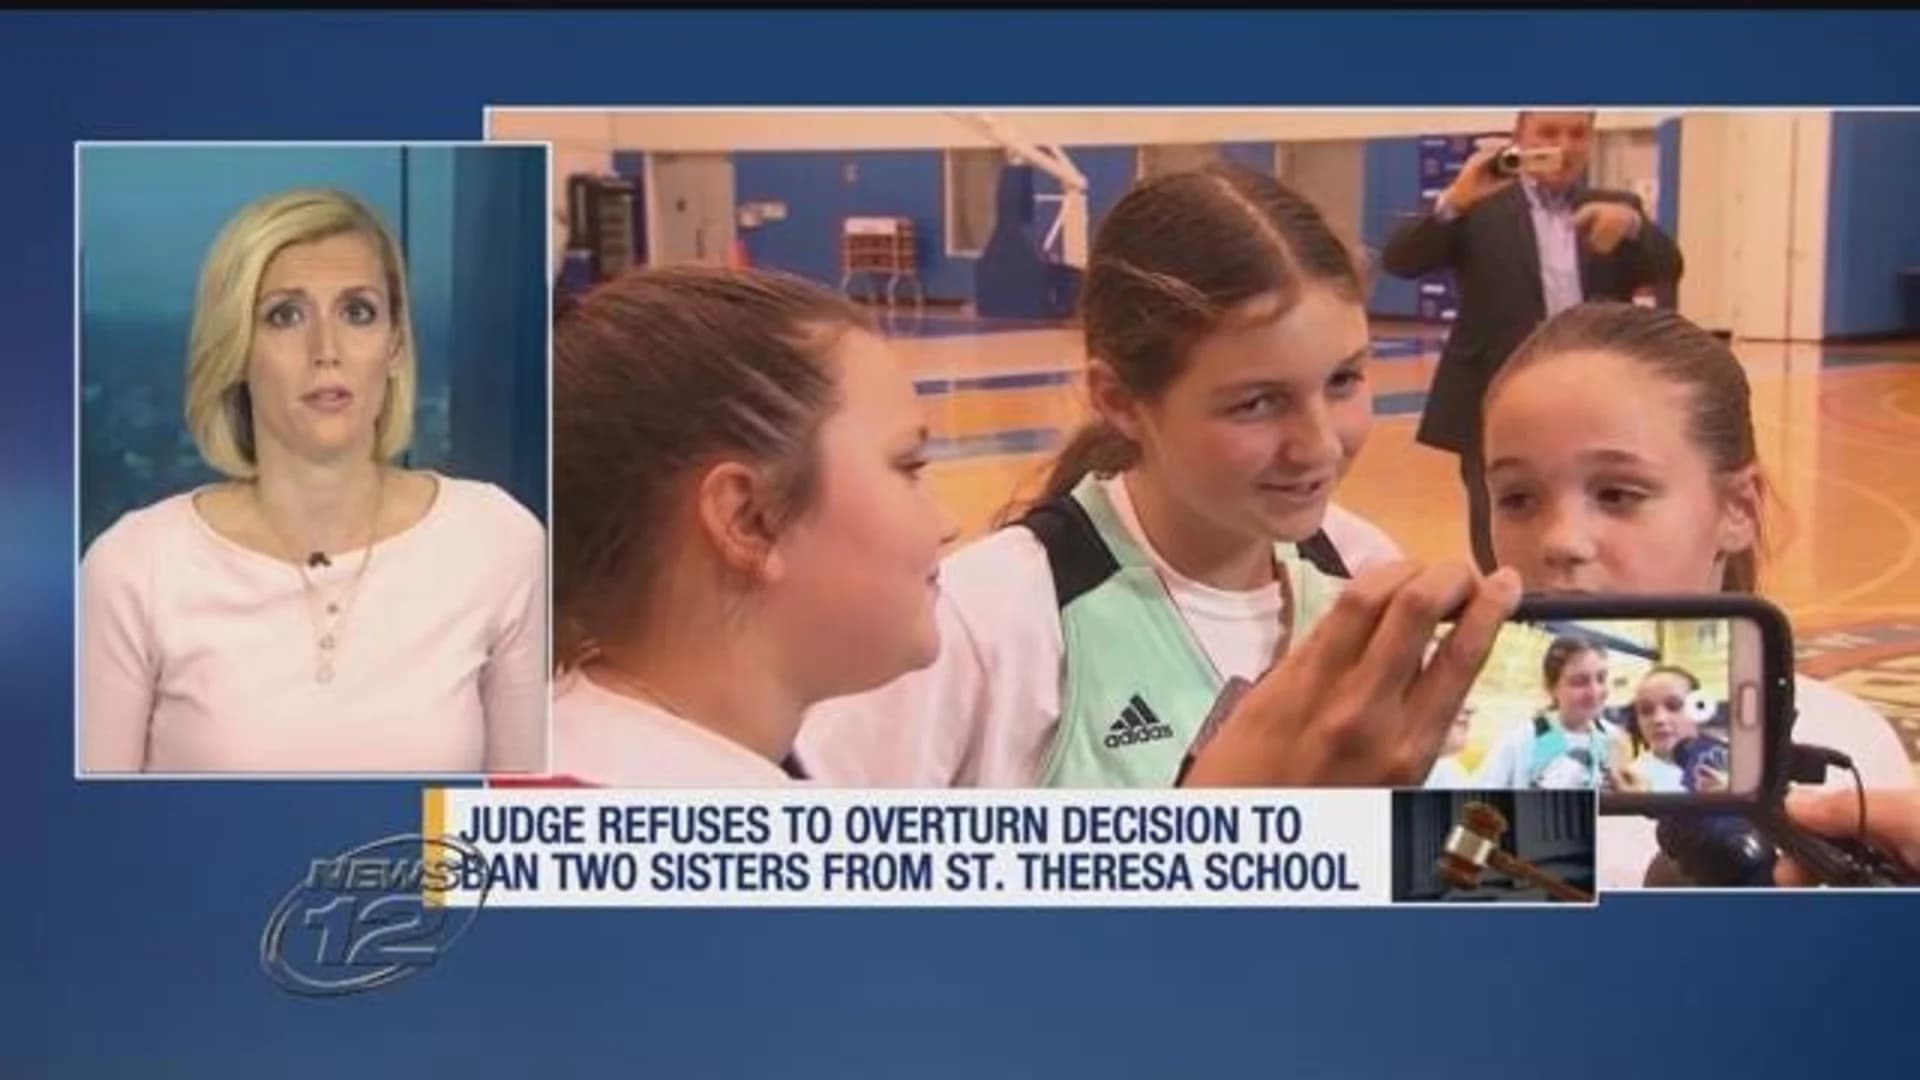 Judge refuses to overturn decision to ban 2 sisters from St. Theresa School